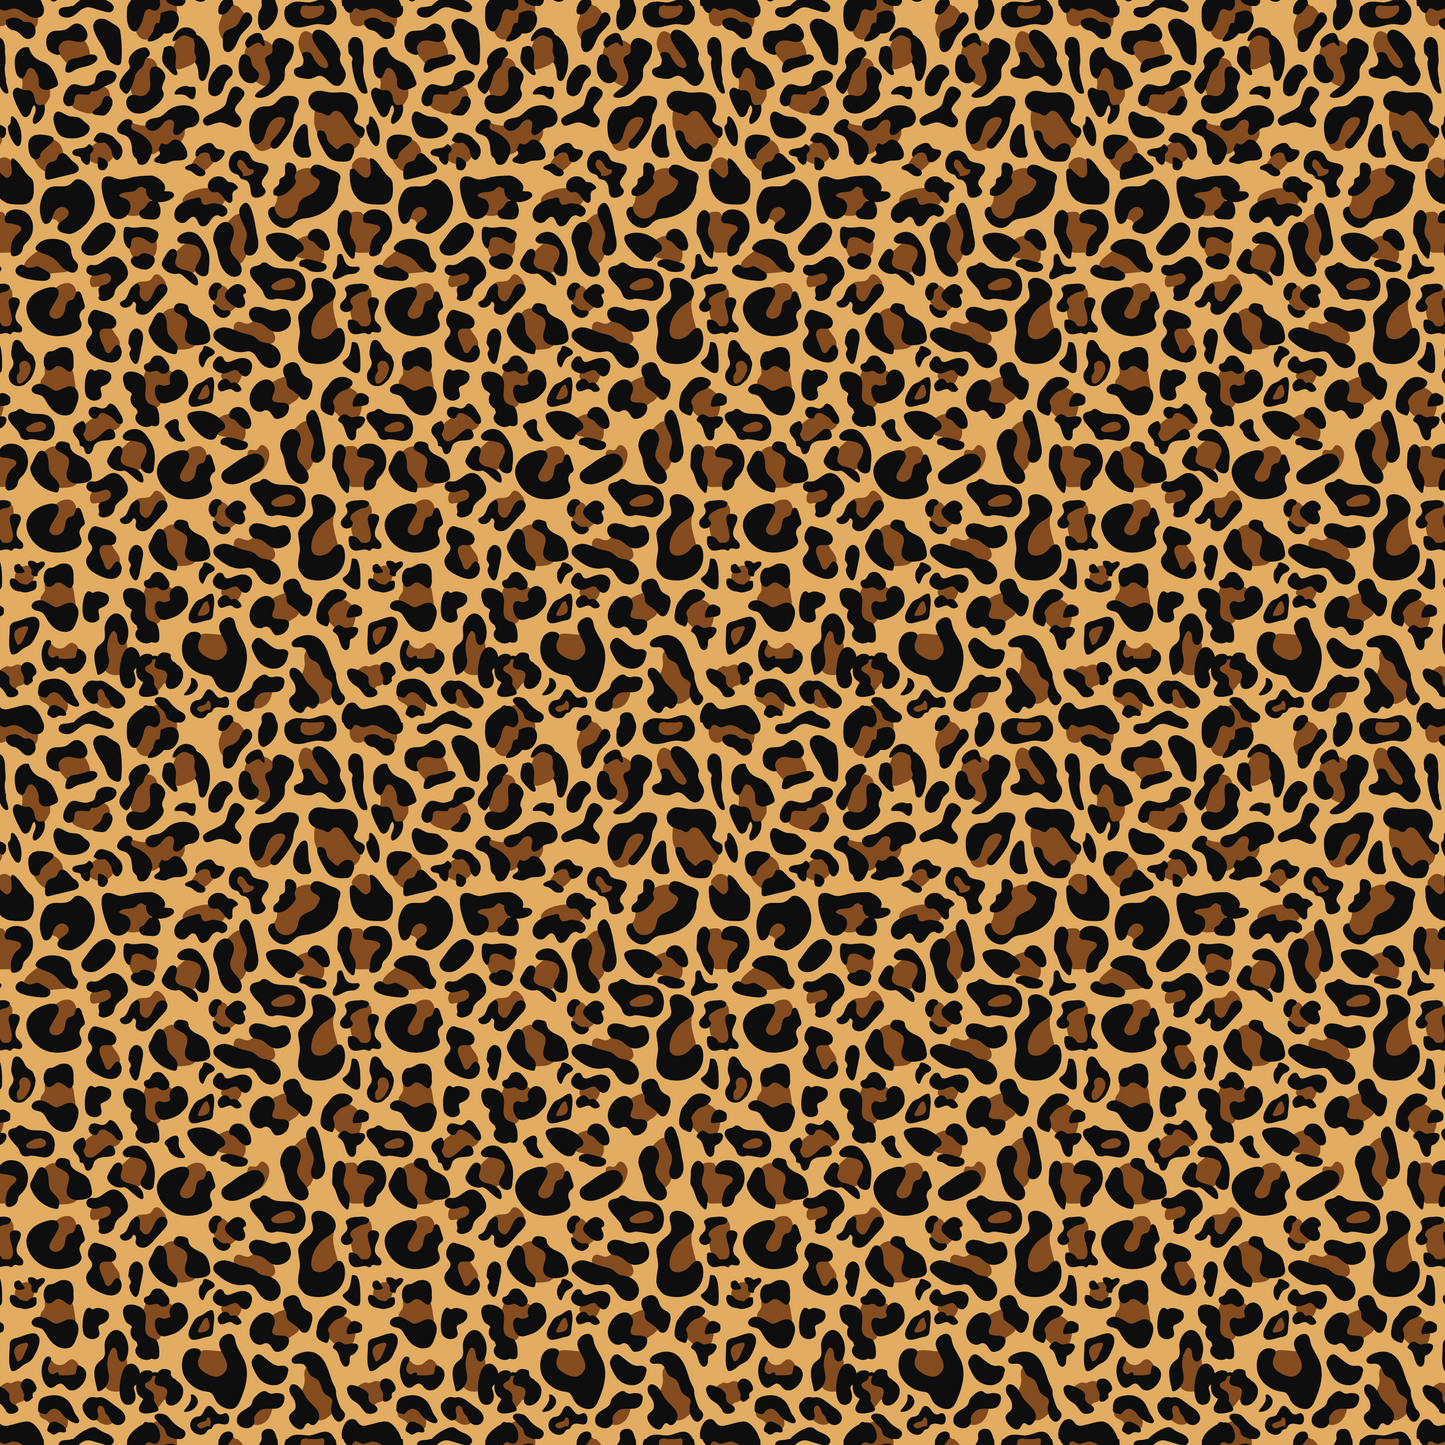 Colorful Leopard - Brown Spots on Colorful Background 003